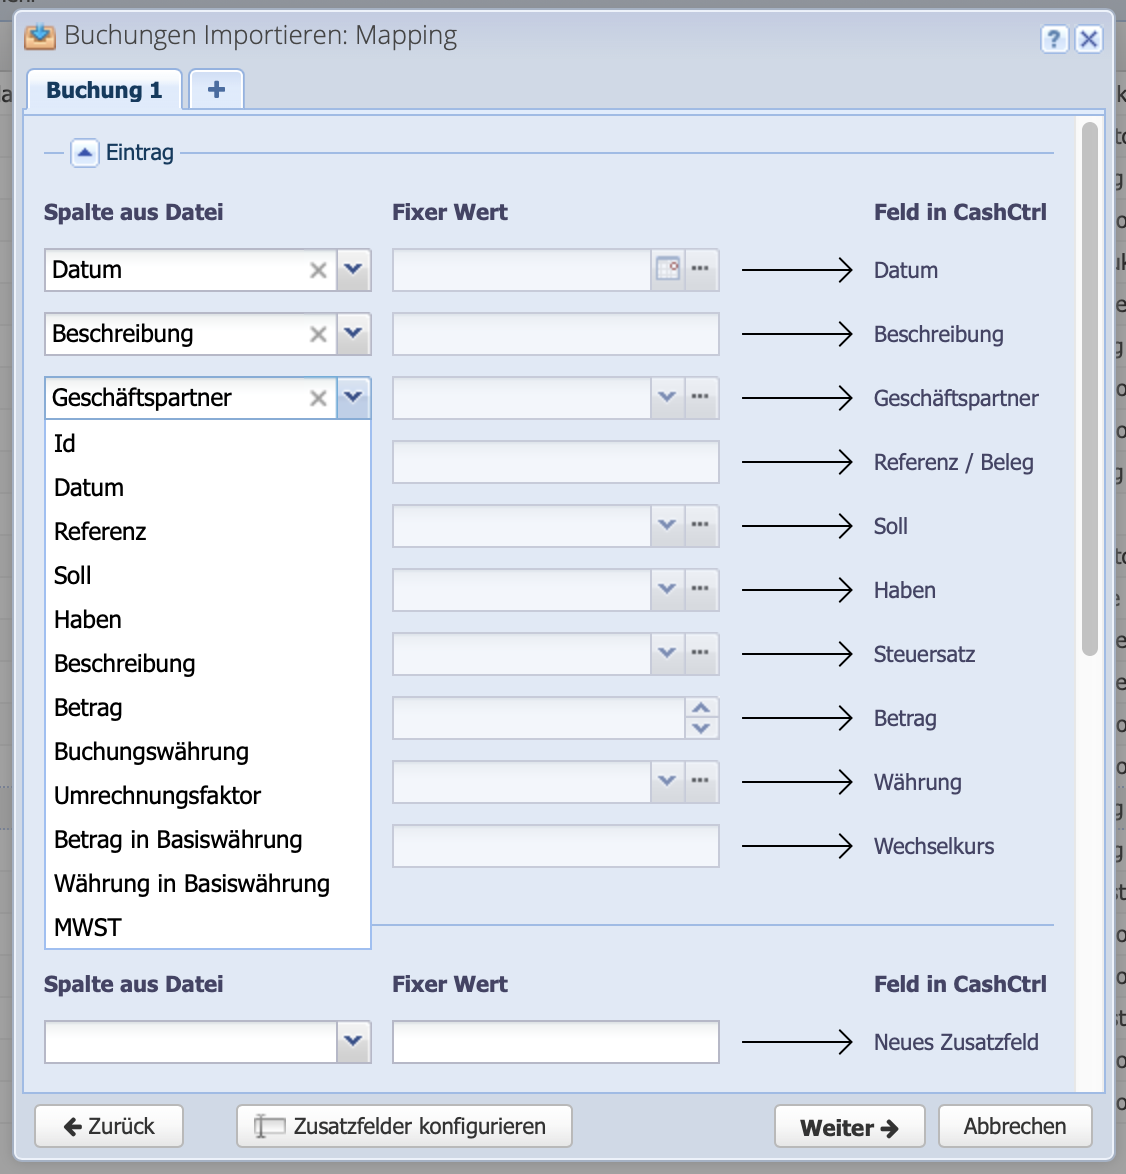 Screenshot of the mapping dialog when importing bookings via Excel or CSV file